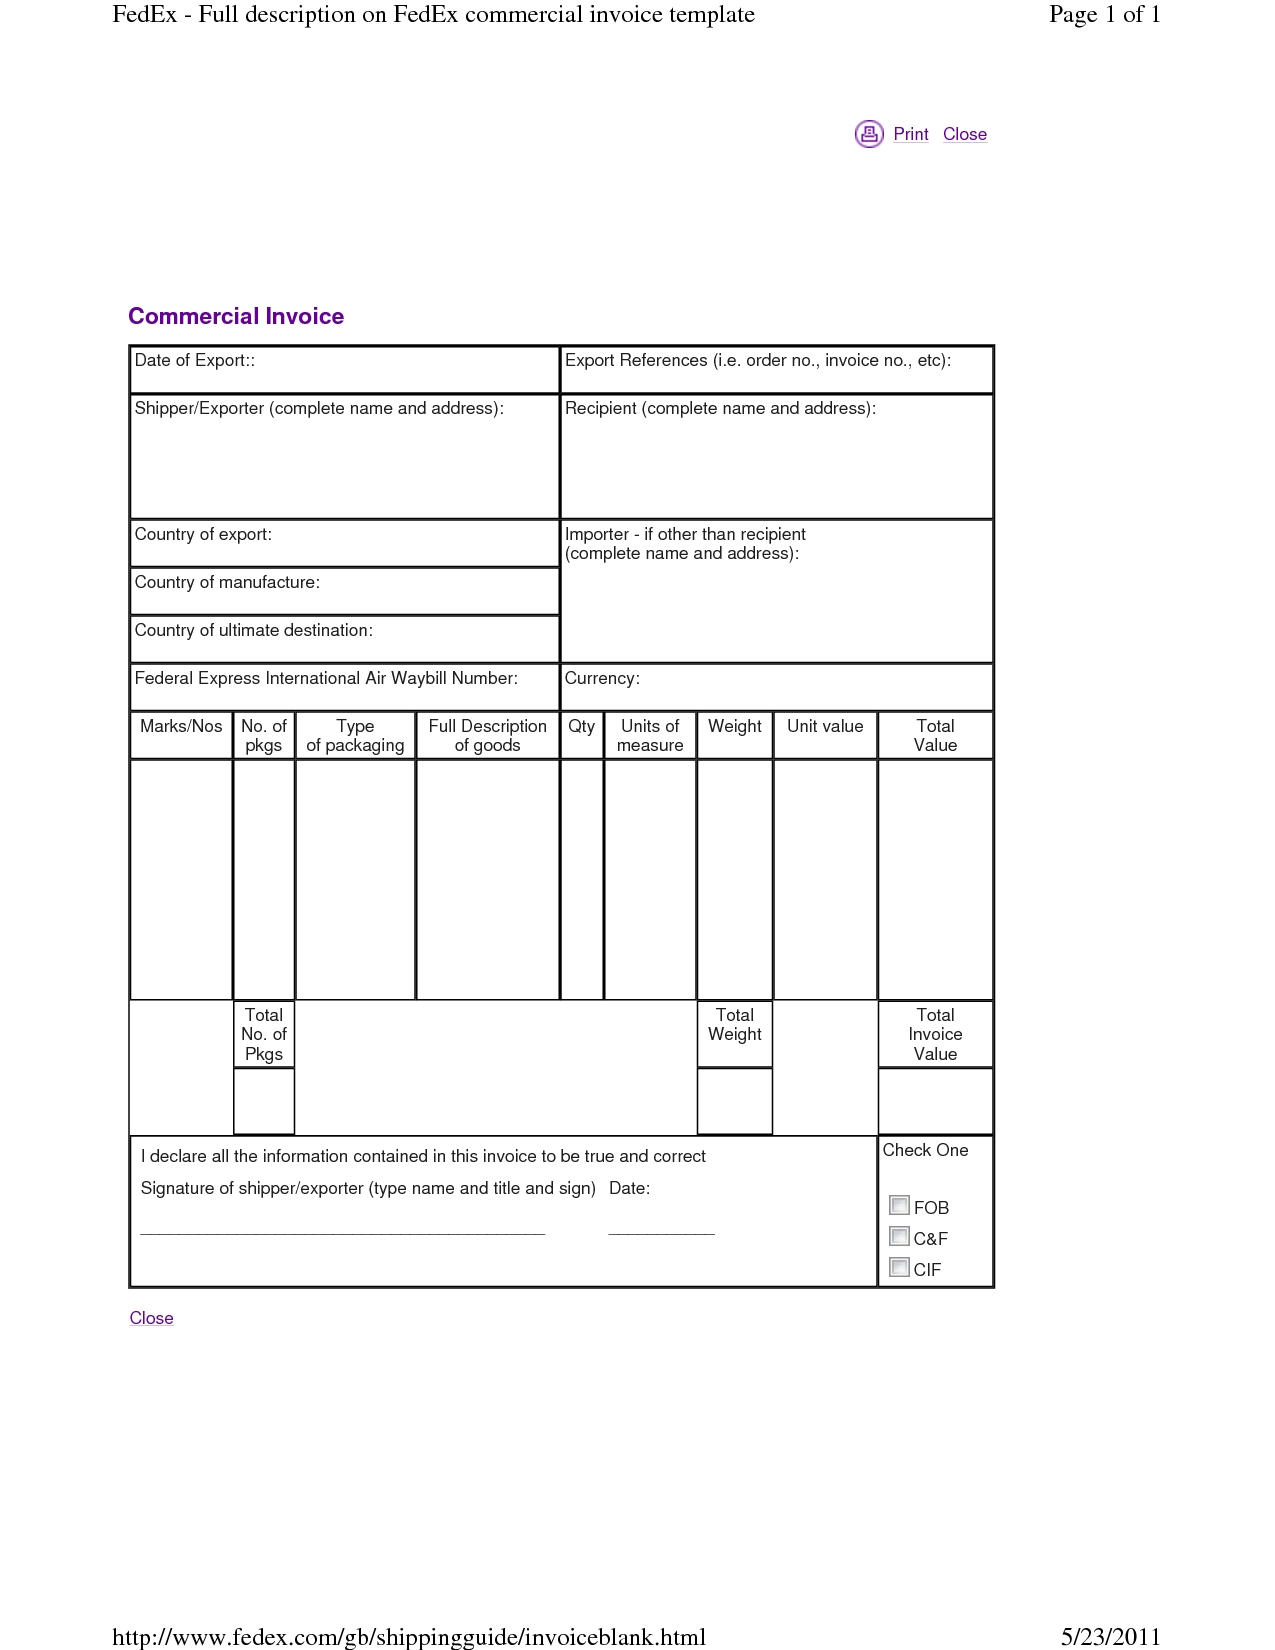 commercial invoice template for fedex